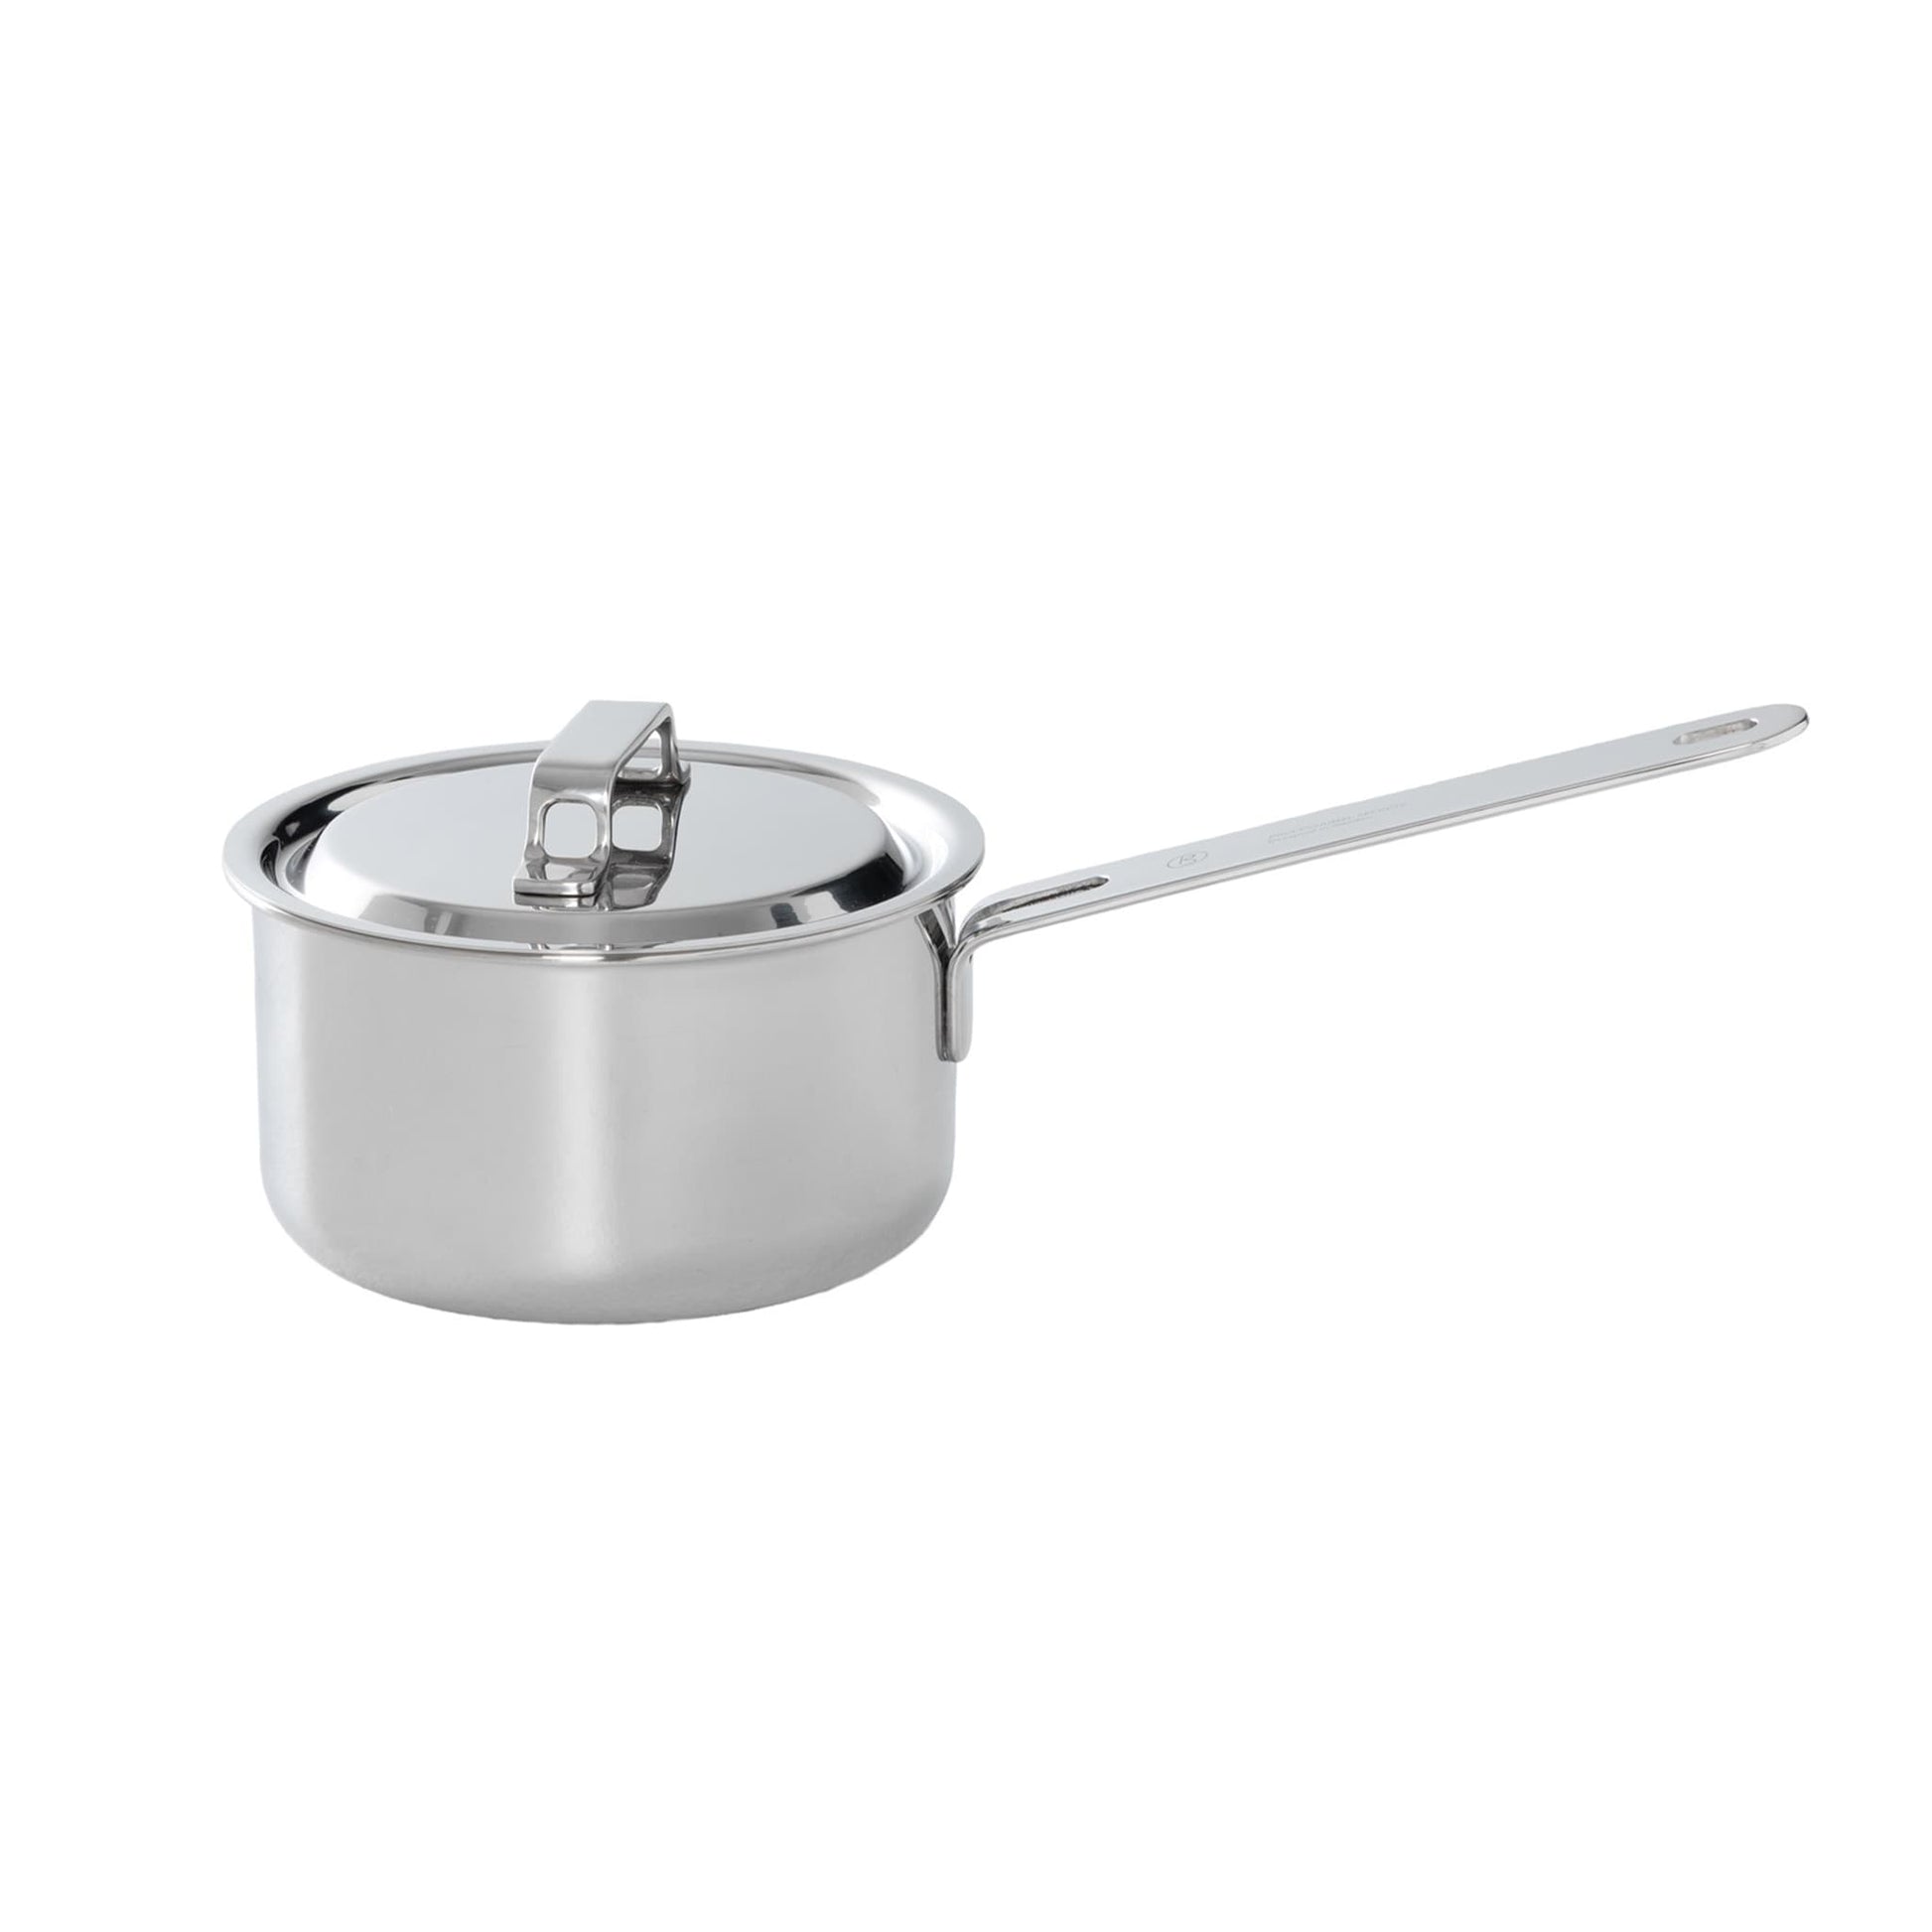 Instant Pot Stainless Steel Inner Cooking Pot with Indonesia